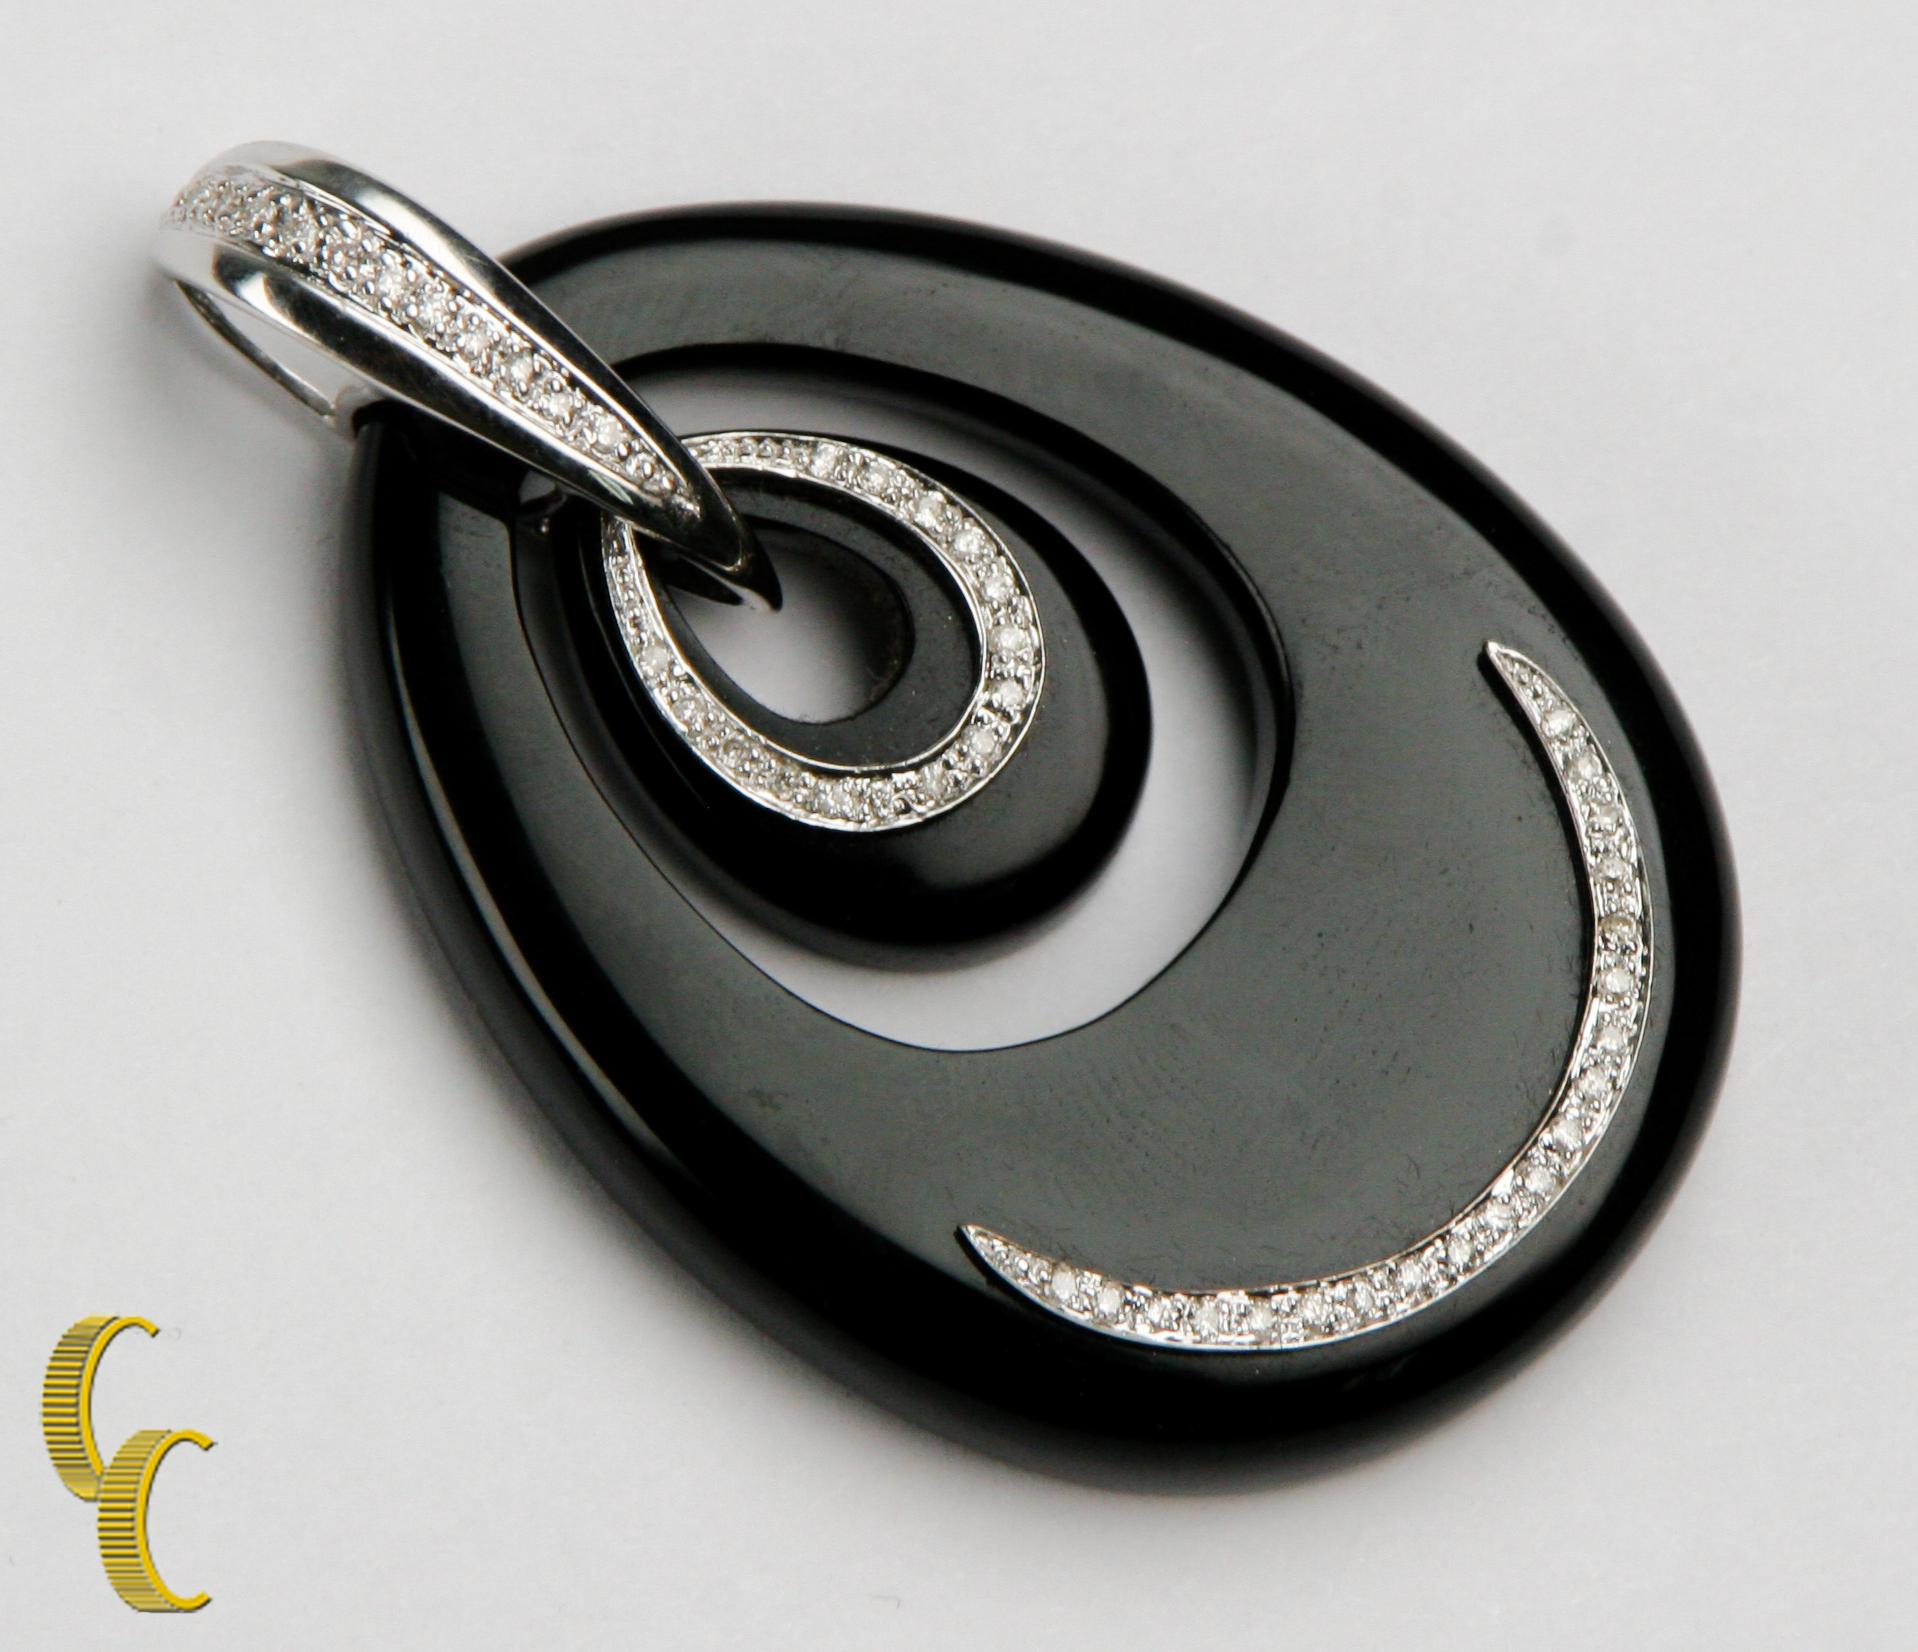 Oval Shaped Black Onyx and Diamond Pendant Set in 18 Karat White Gold In Good Condition For Sale In Sherman Oaks, CA